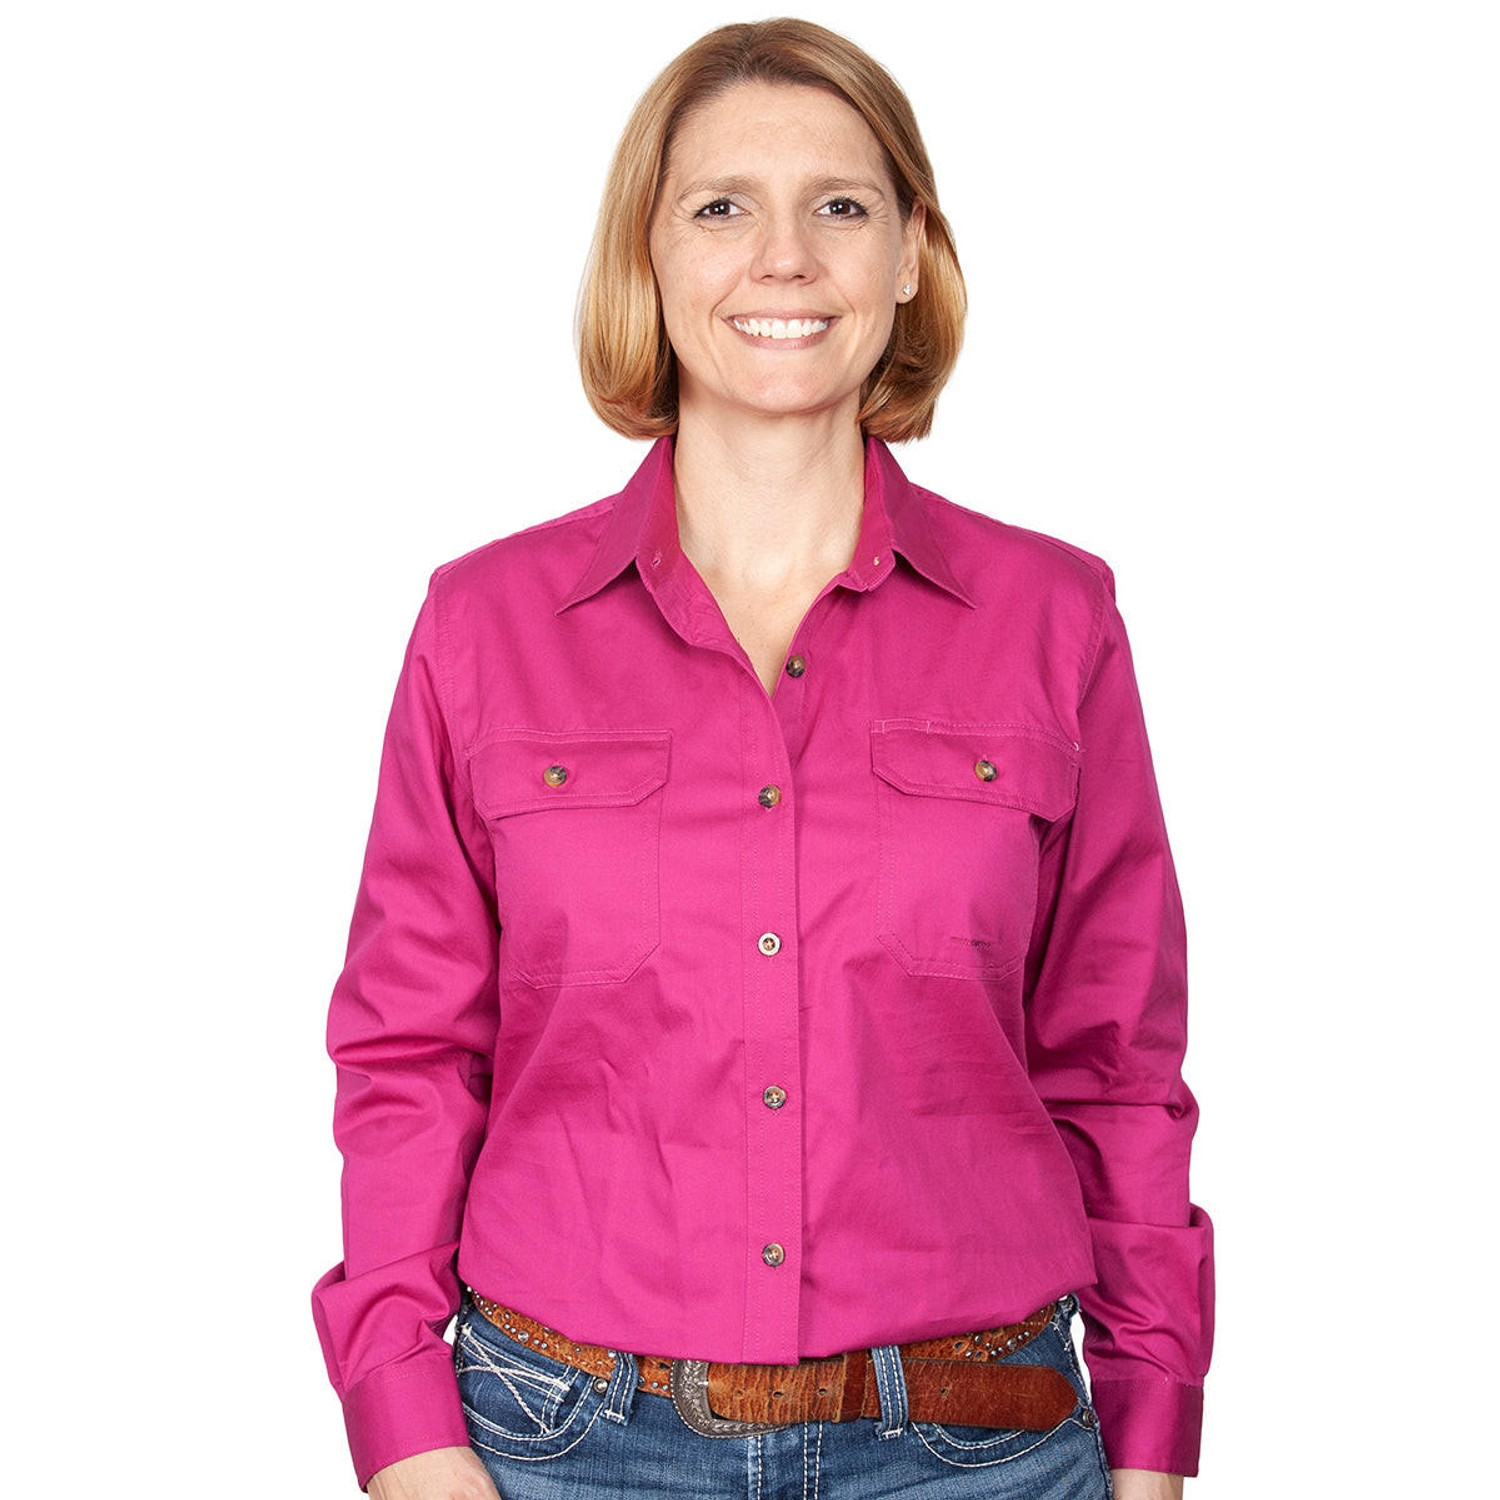 Just Country 50502 Ladies Brooke Longsleeve Open Front Workshirt in Magenta Bulk Buy Deal, Buy 4 or more Just Country Adults Shirts for dollar44.95 Each